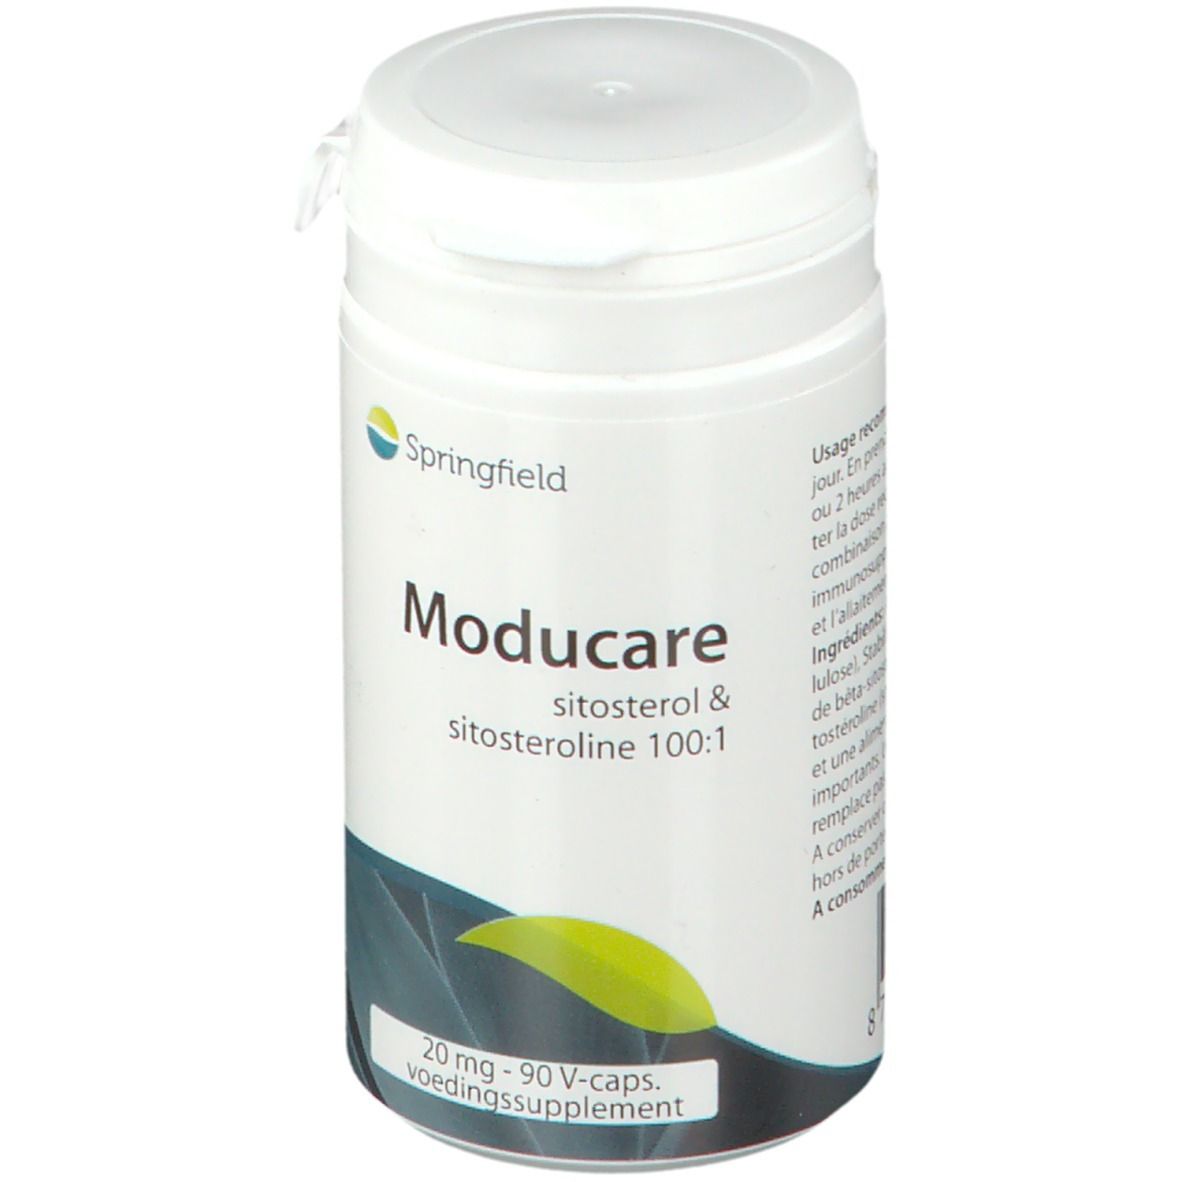 Springfield Moducare Sitosterol & Sitosteroline